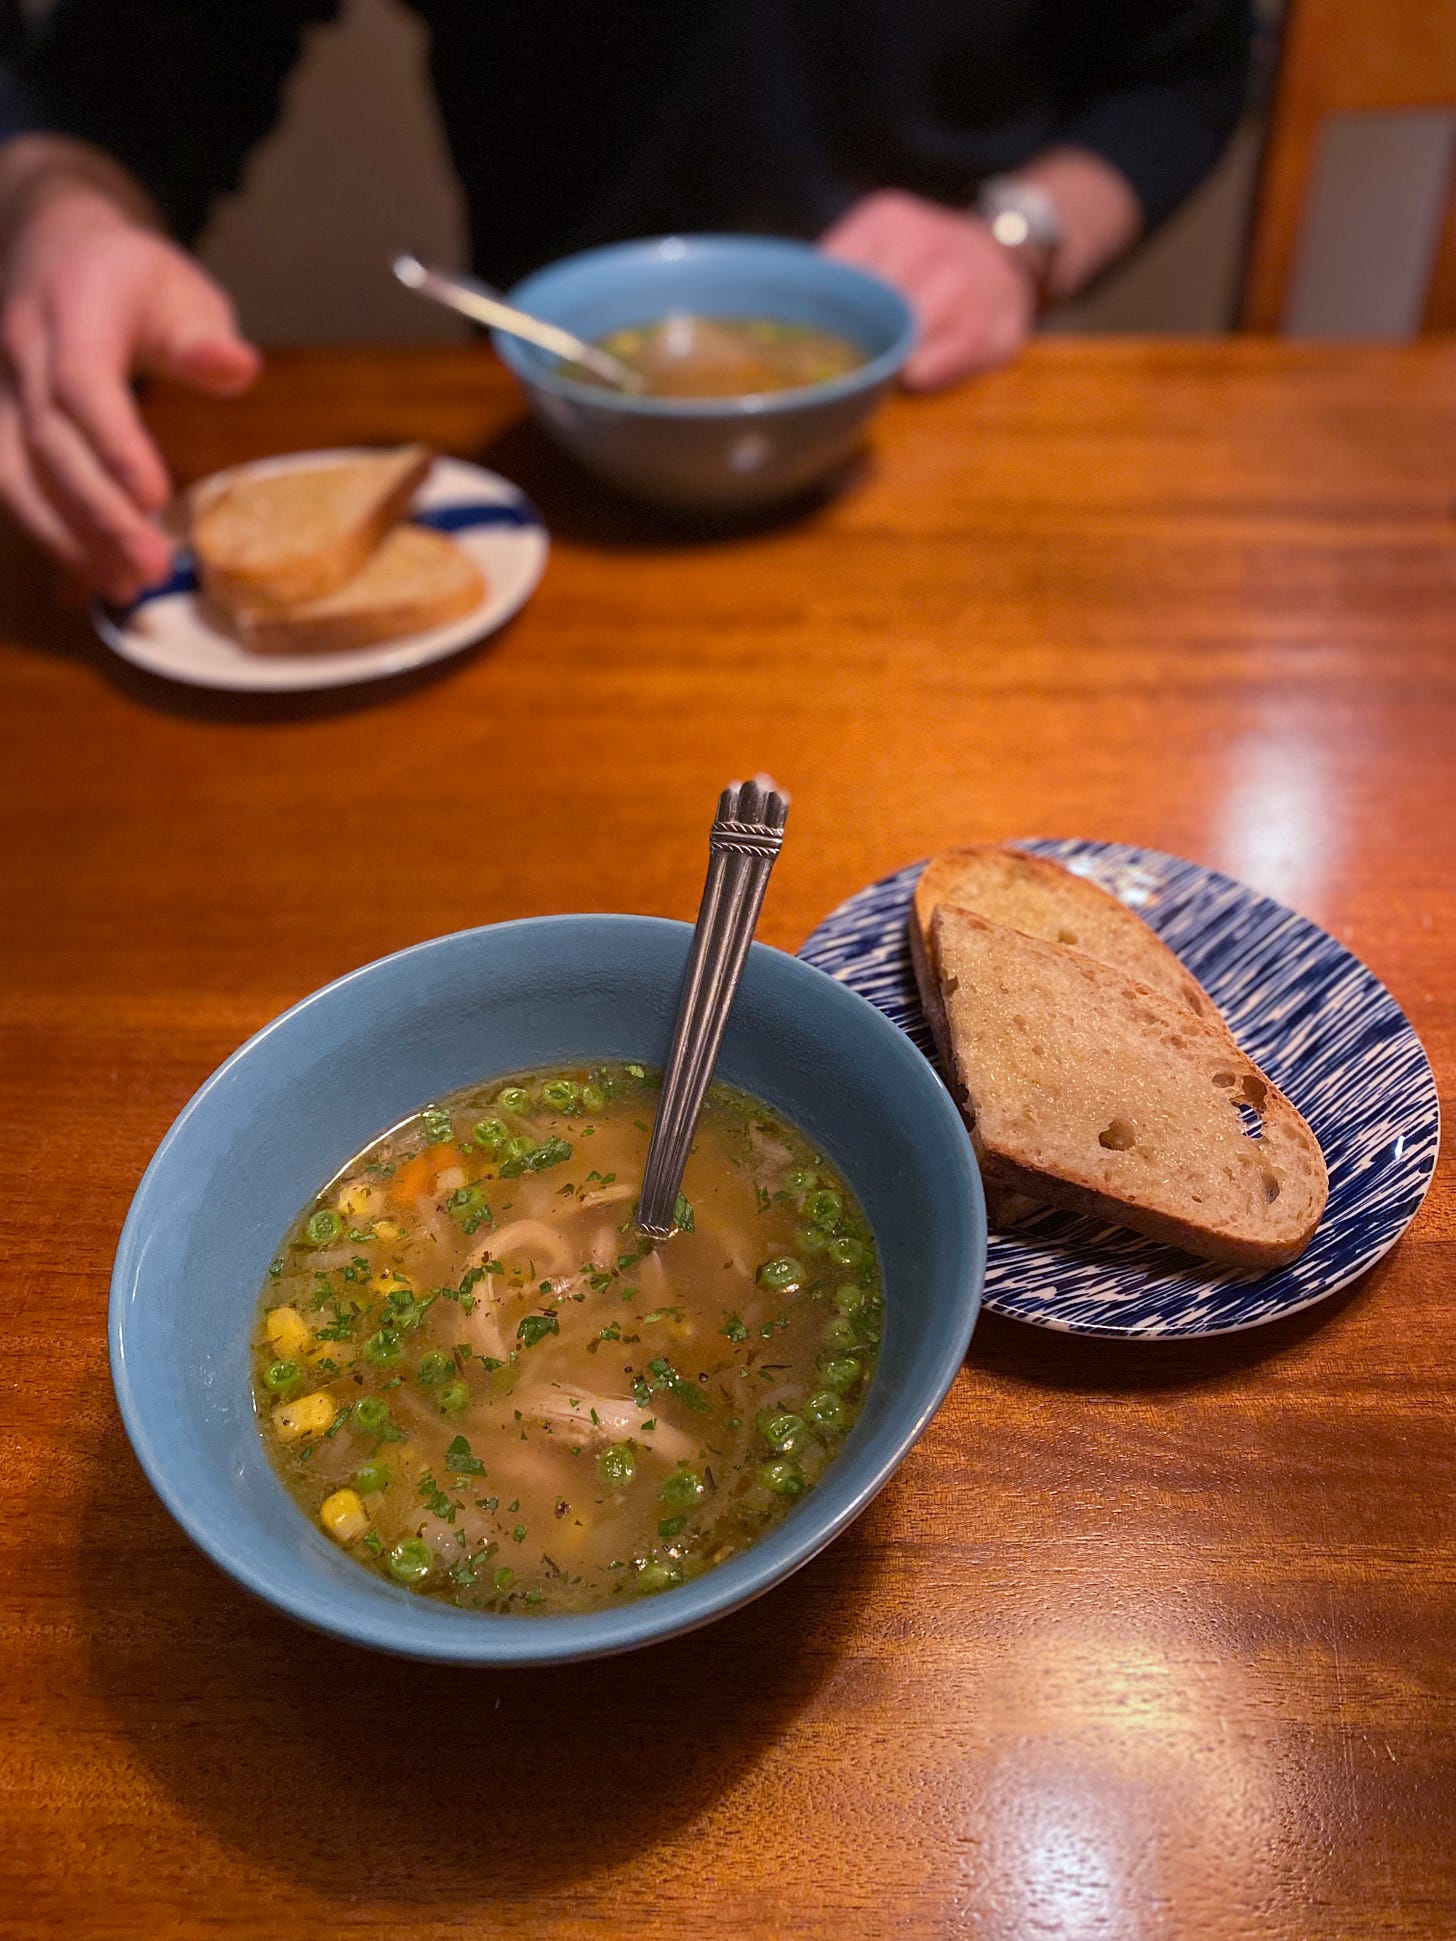 Two blue bowls of chicken noodle soup across from each other on the table, each with a piece of buttered sourdough toast on a small plate beside it. On the opposite side of the table, Jeff's hand reaches for his toast.